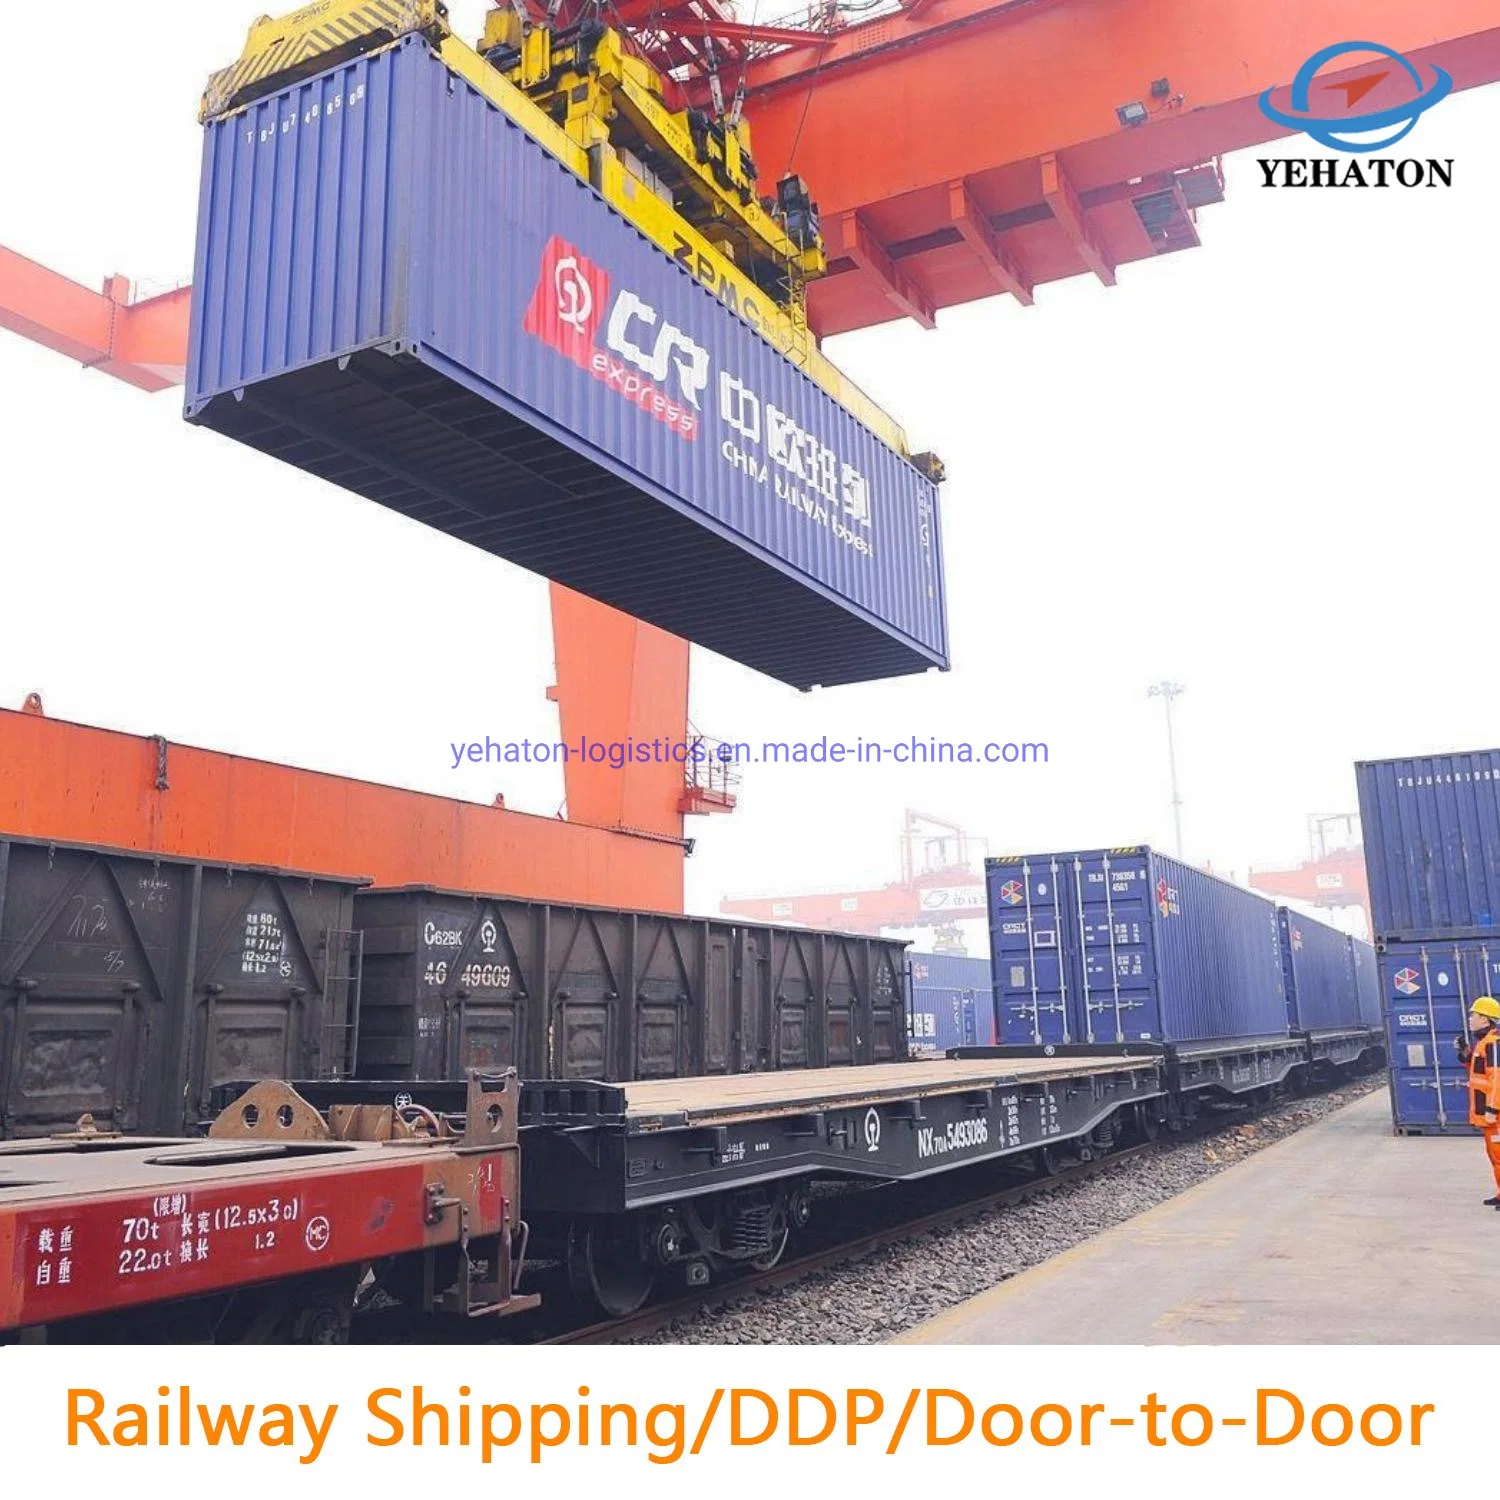 DDP/LCL Railway/Train Cargo Shipping China Freight Forwarder Logistics Service, Amazon Fba Transportation Delivery from China to Europe/UK/Germany/France/Spain